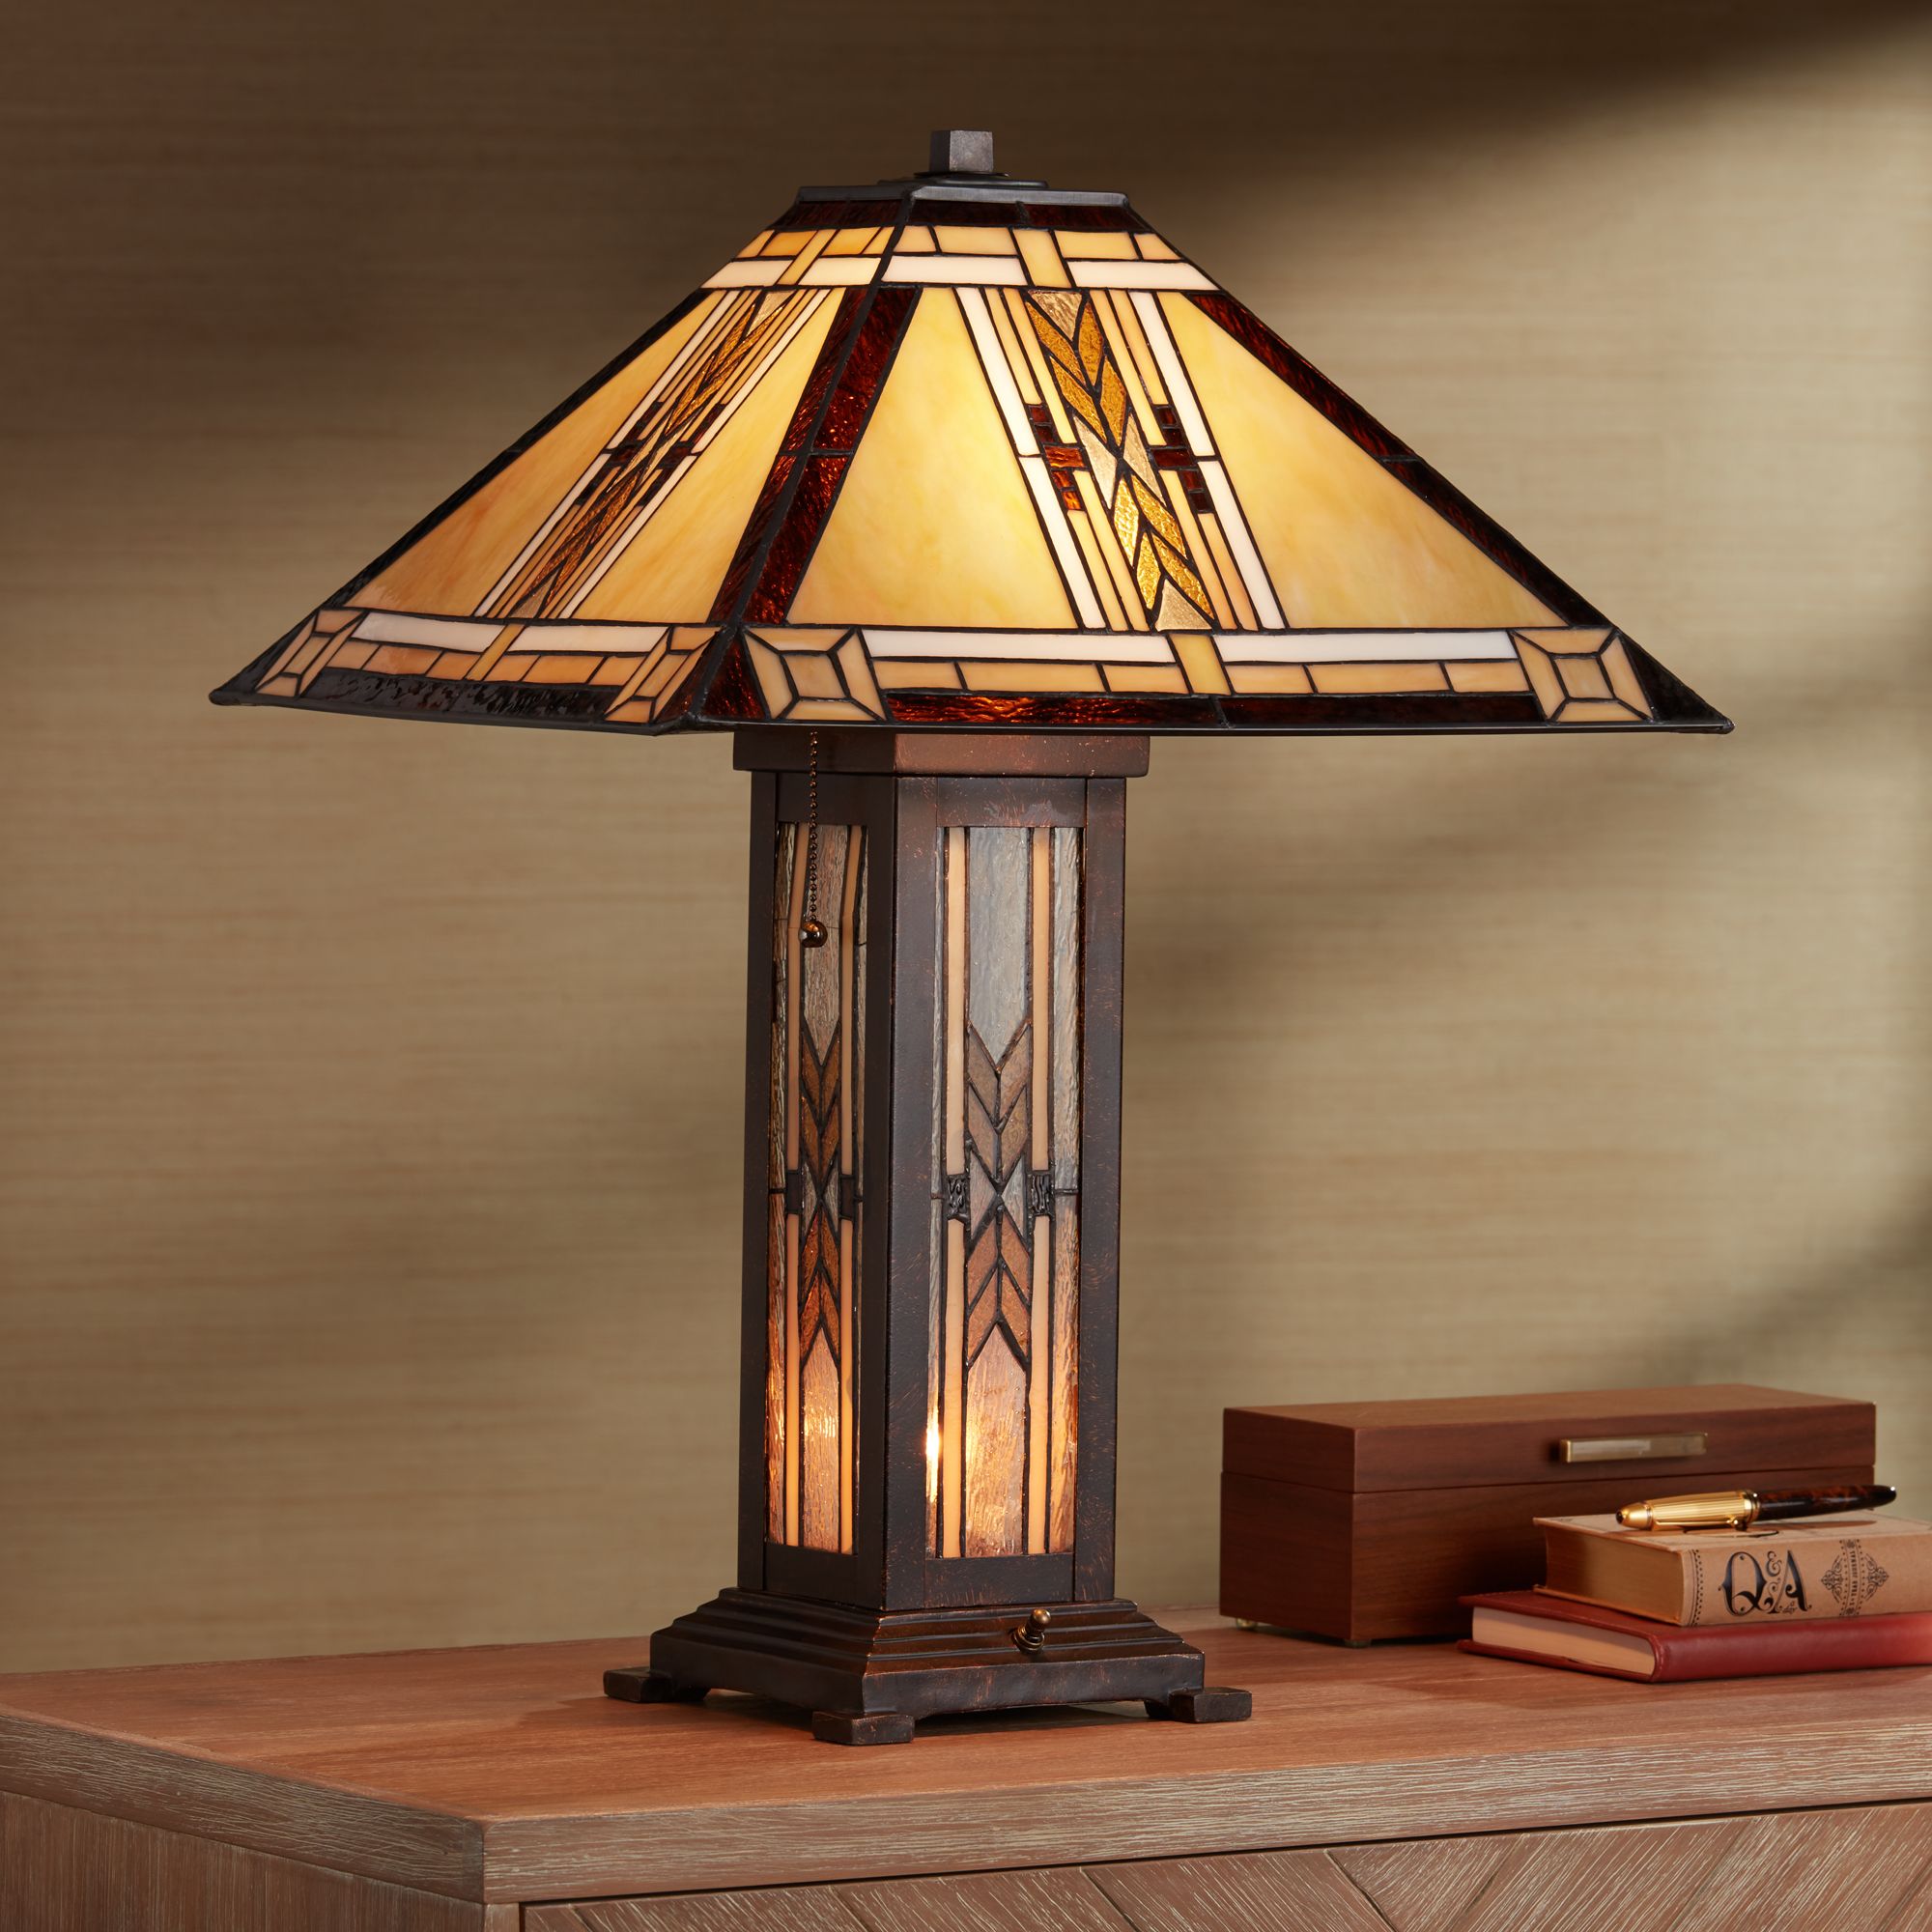 Franklin Iron Works  Style Table Lamp with Nightlight Mission 25.5" High Bronze Stained Glass for Living Room Family Bedroom (Color May Vary)